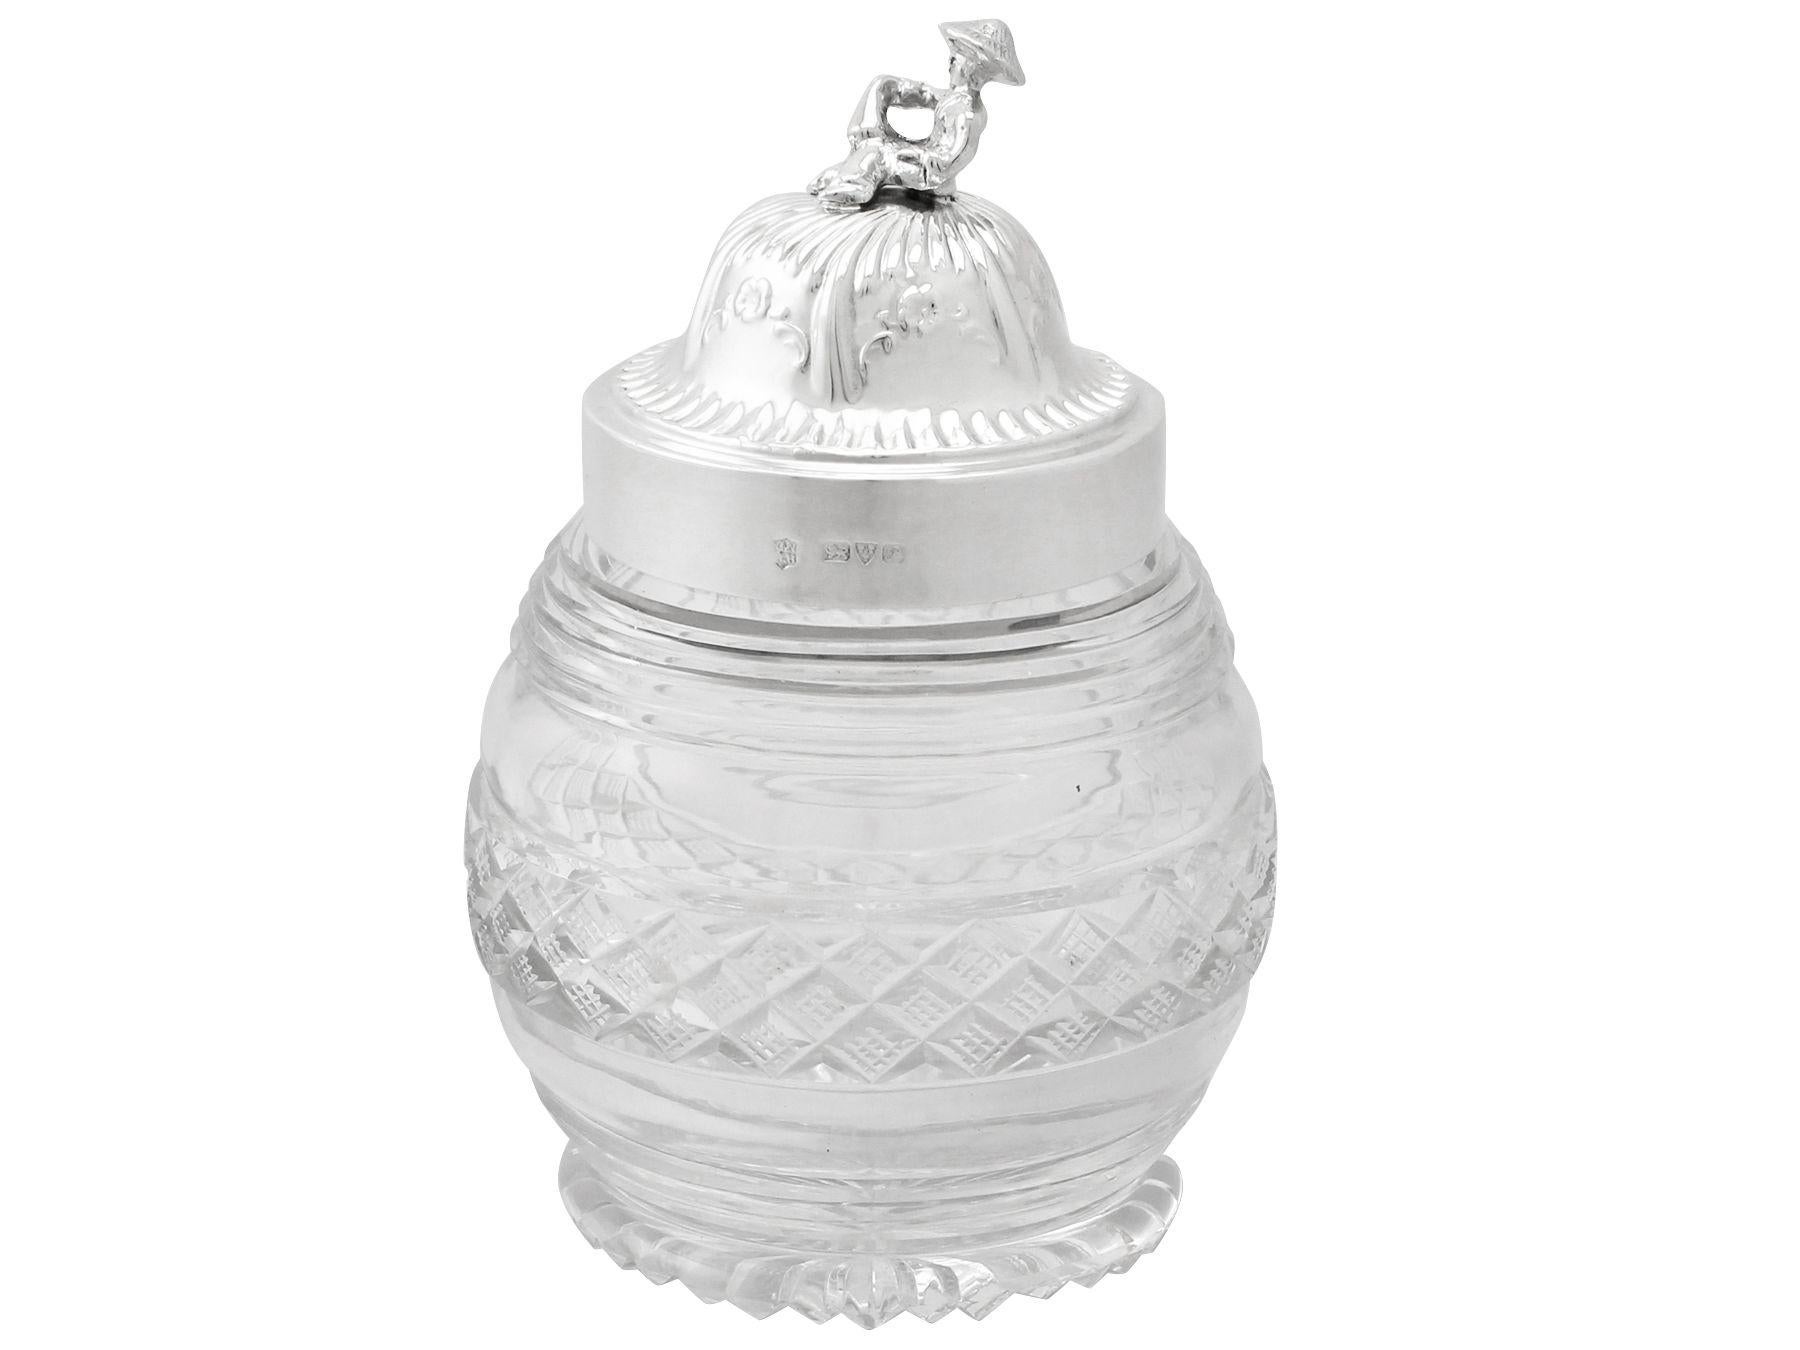 A fine and impressive antique George V English sterling silver and cut-glass tea caddy, an addition to our silver mounted glass collection.

This impressive antique George V cut-glass tea caddy has a circular rounded form.

The vessel of this